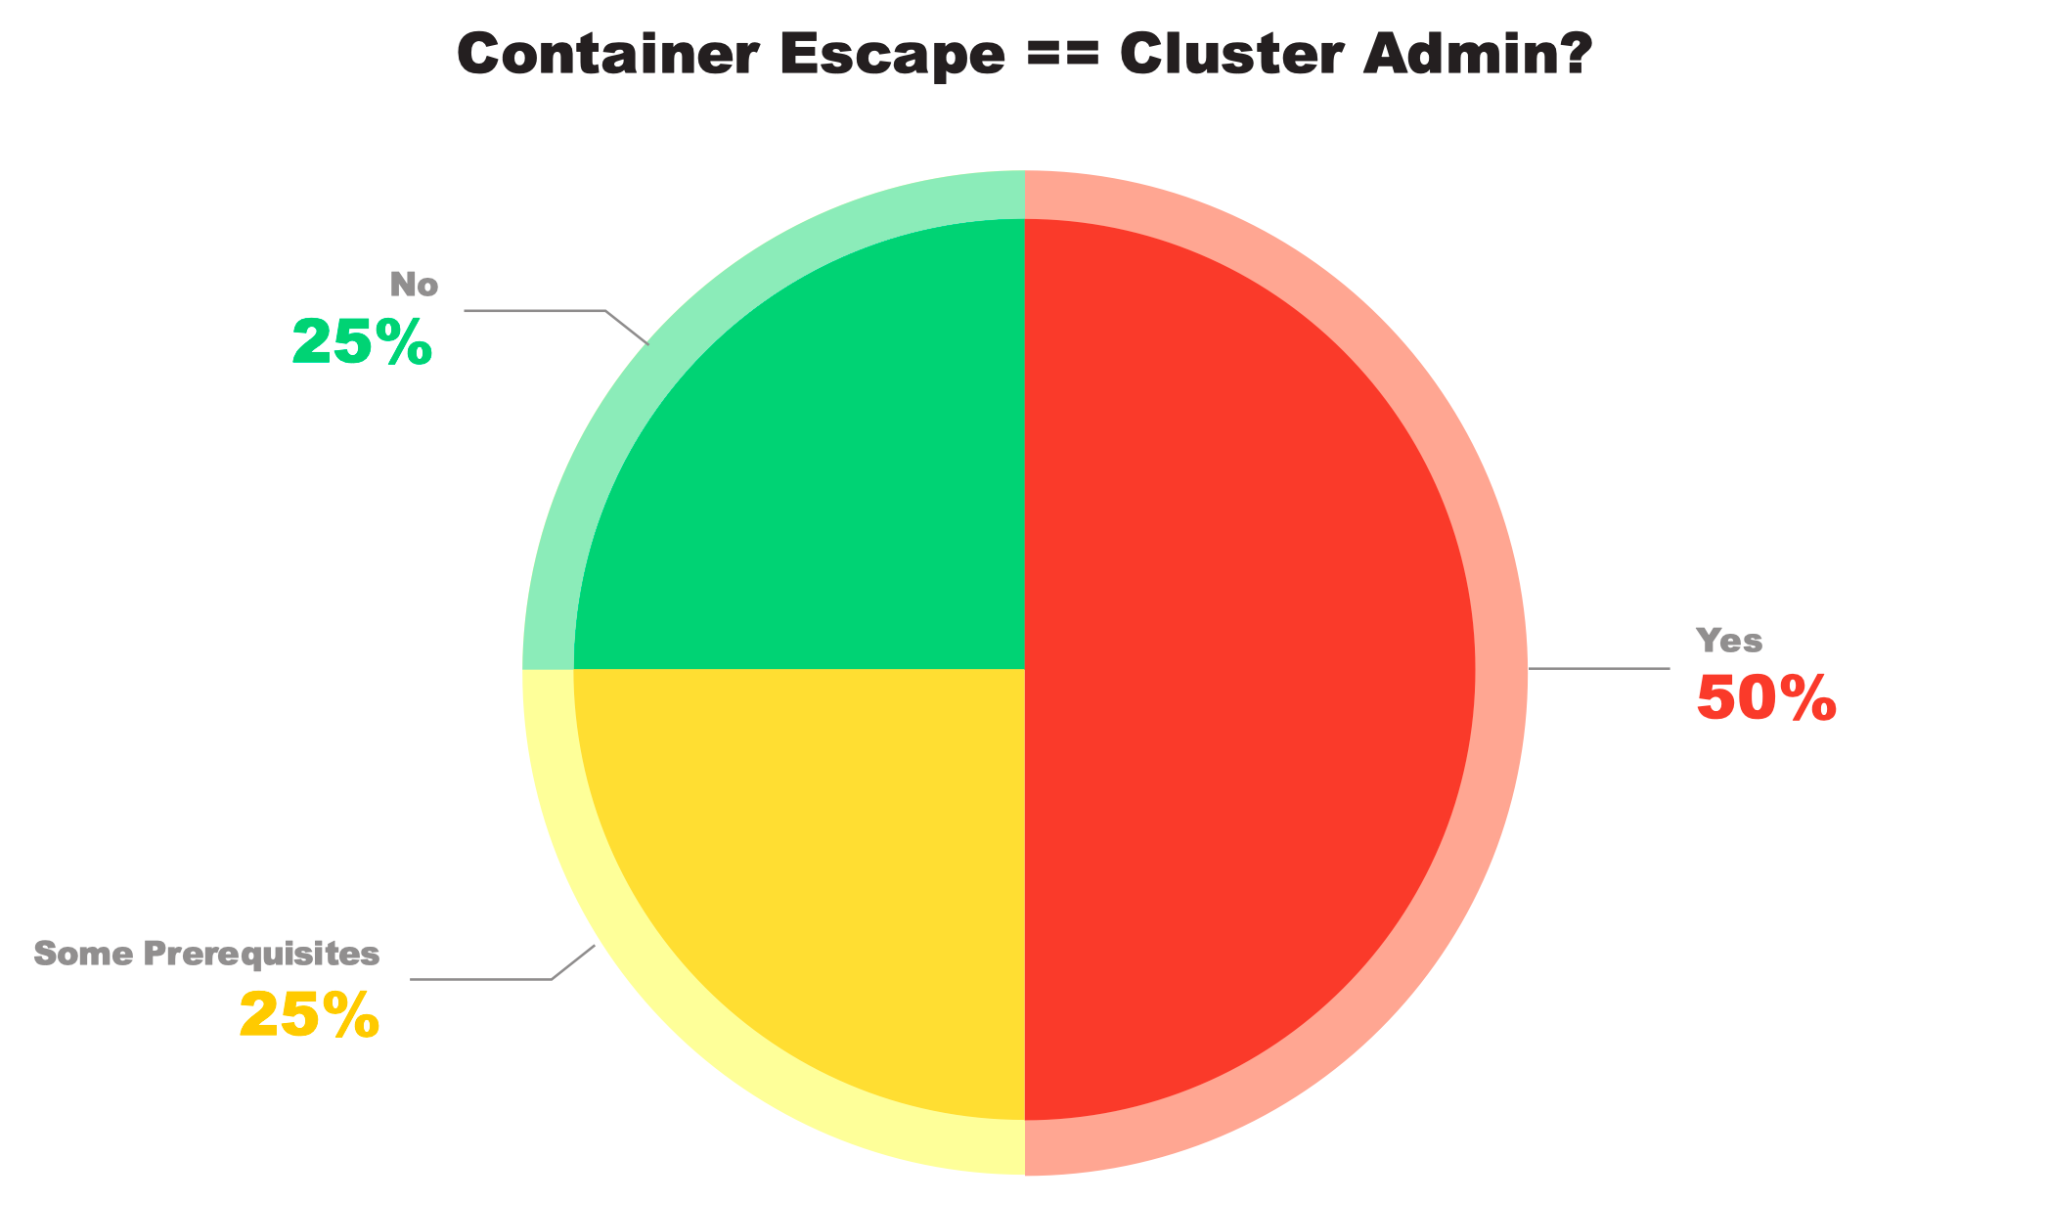 Image 2 is a pie chart showing the percentage of platforms where a container escape led to a complete cluster takeover. 50% of credentials used were admin equivalent, with the some prerequisites and no prerequisites splitting the remainder. 